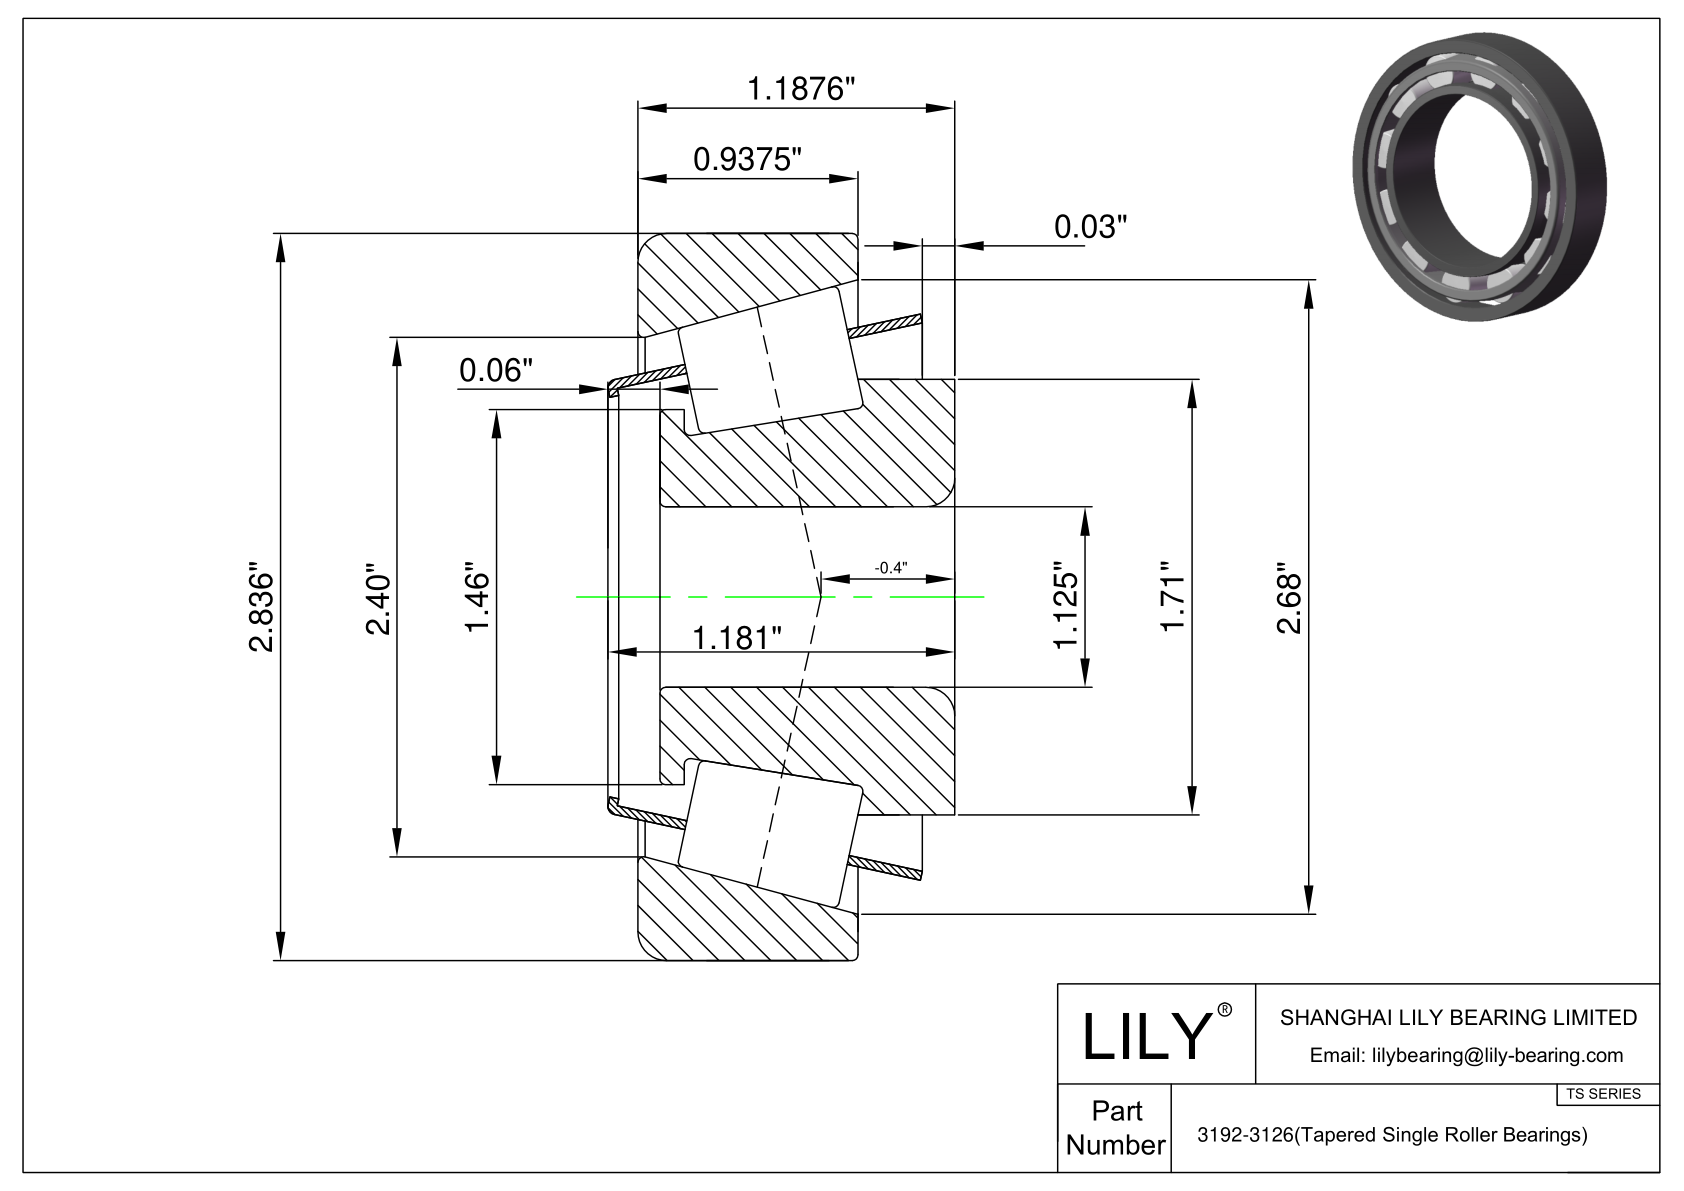 3192-3126 TS (Tapered Single Roller Bearings) (Imperial) cad drawing